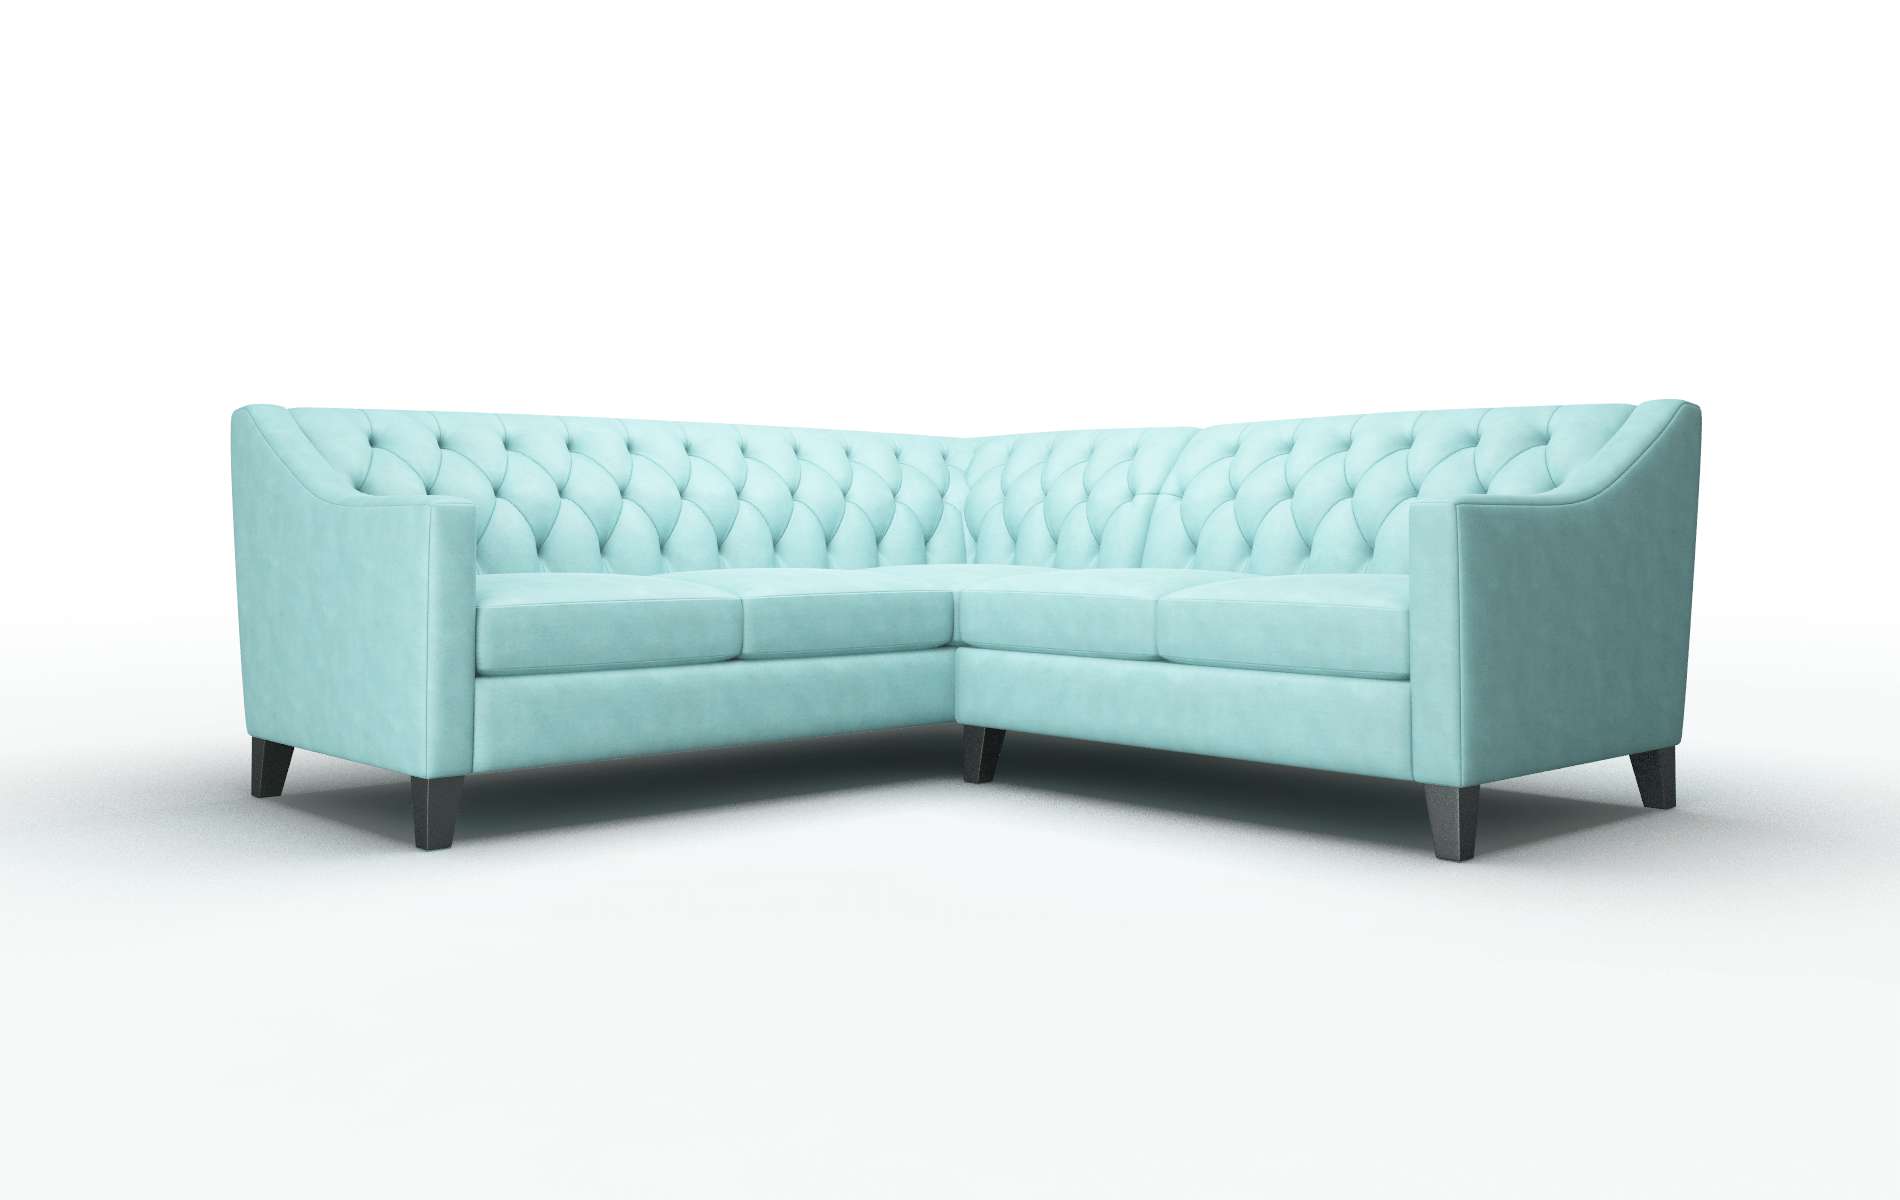 Seville Curious Turquoise Sectional espresso legs 1